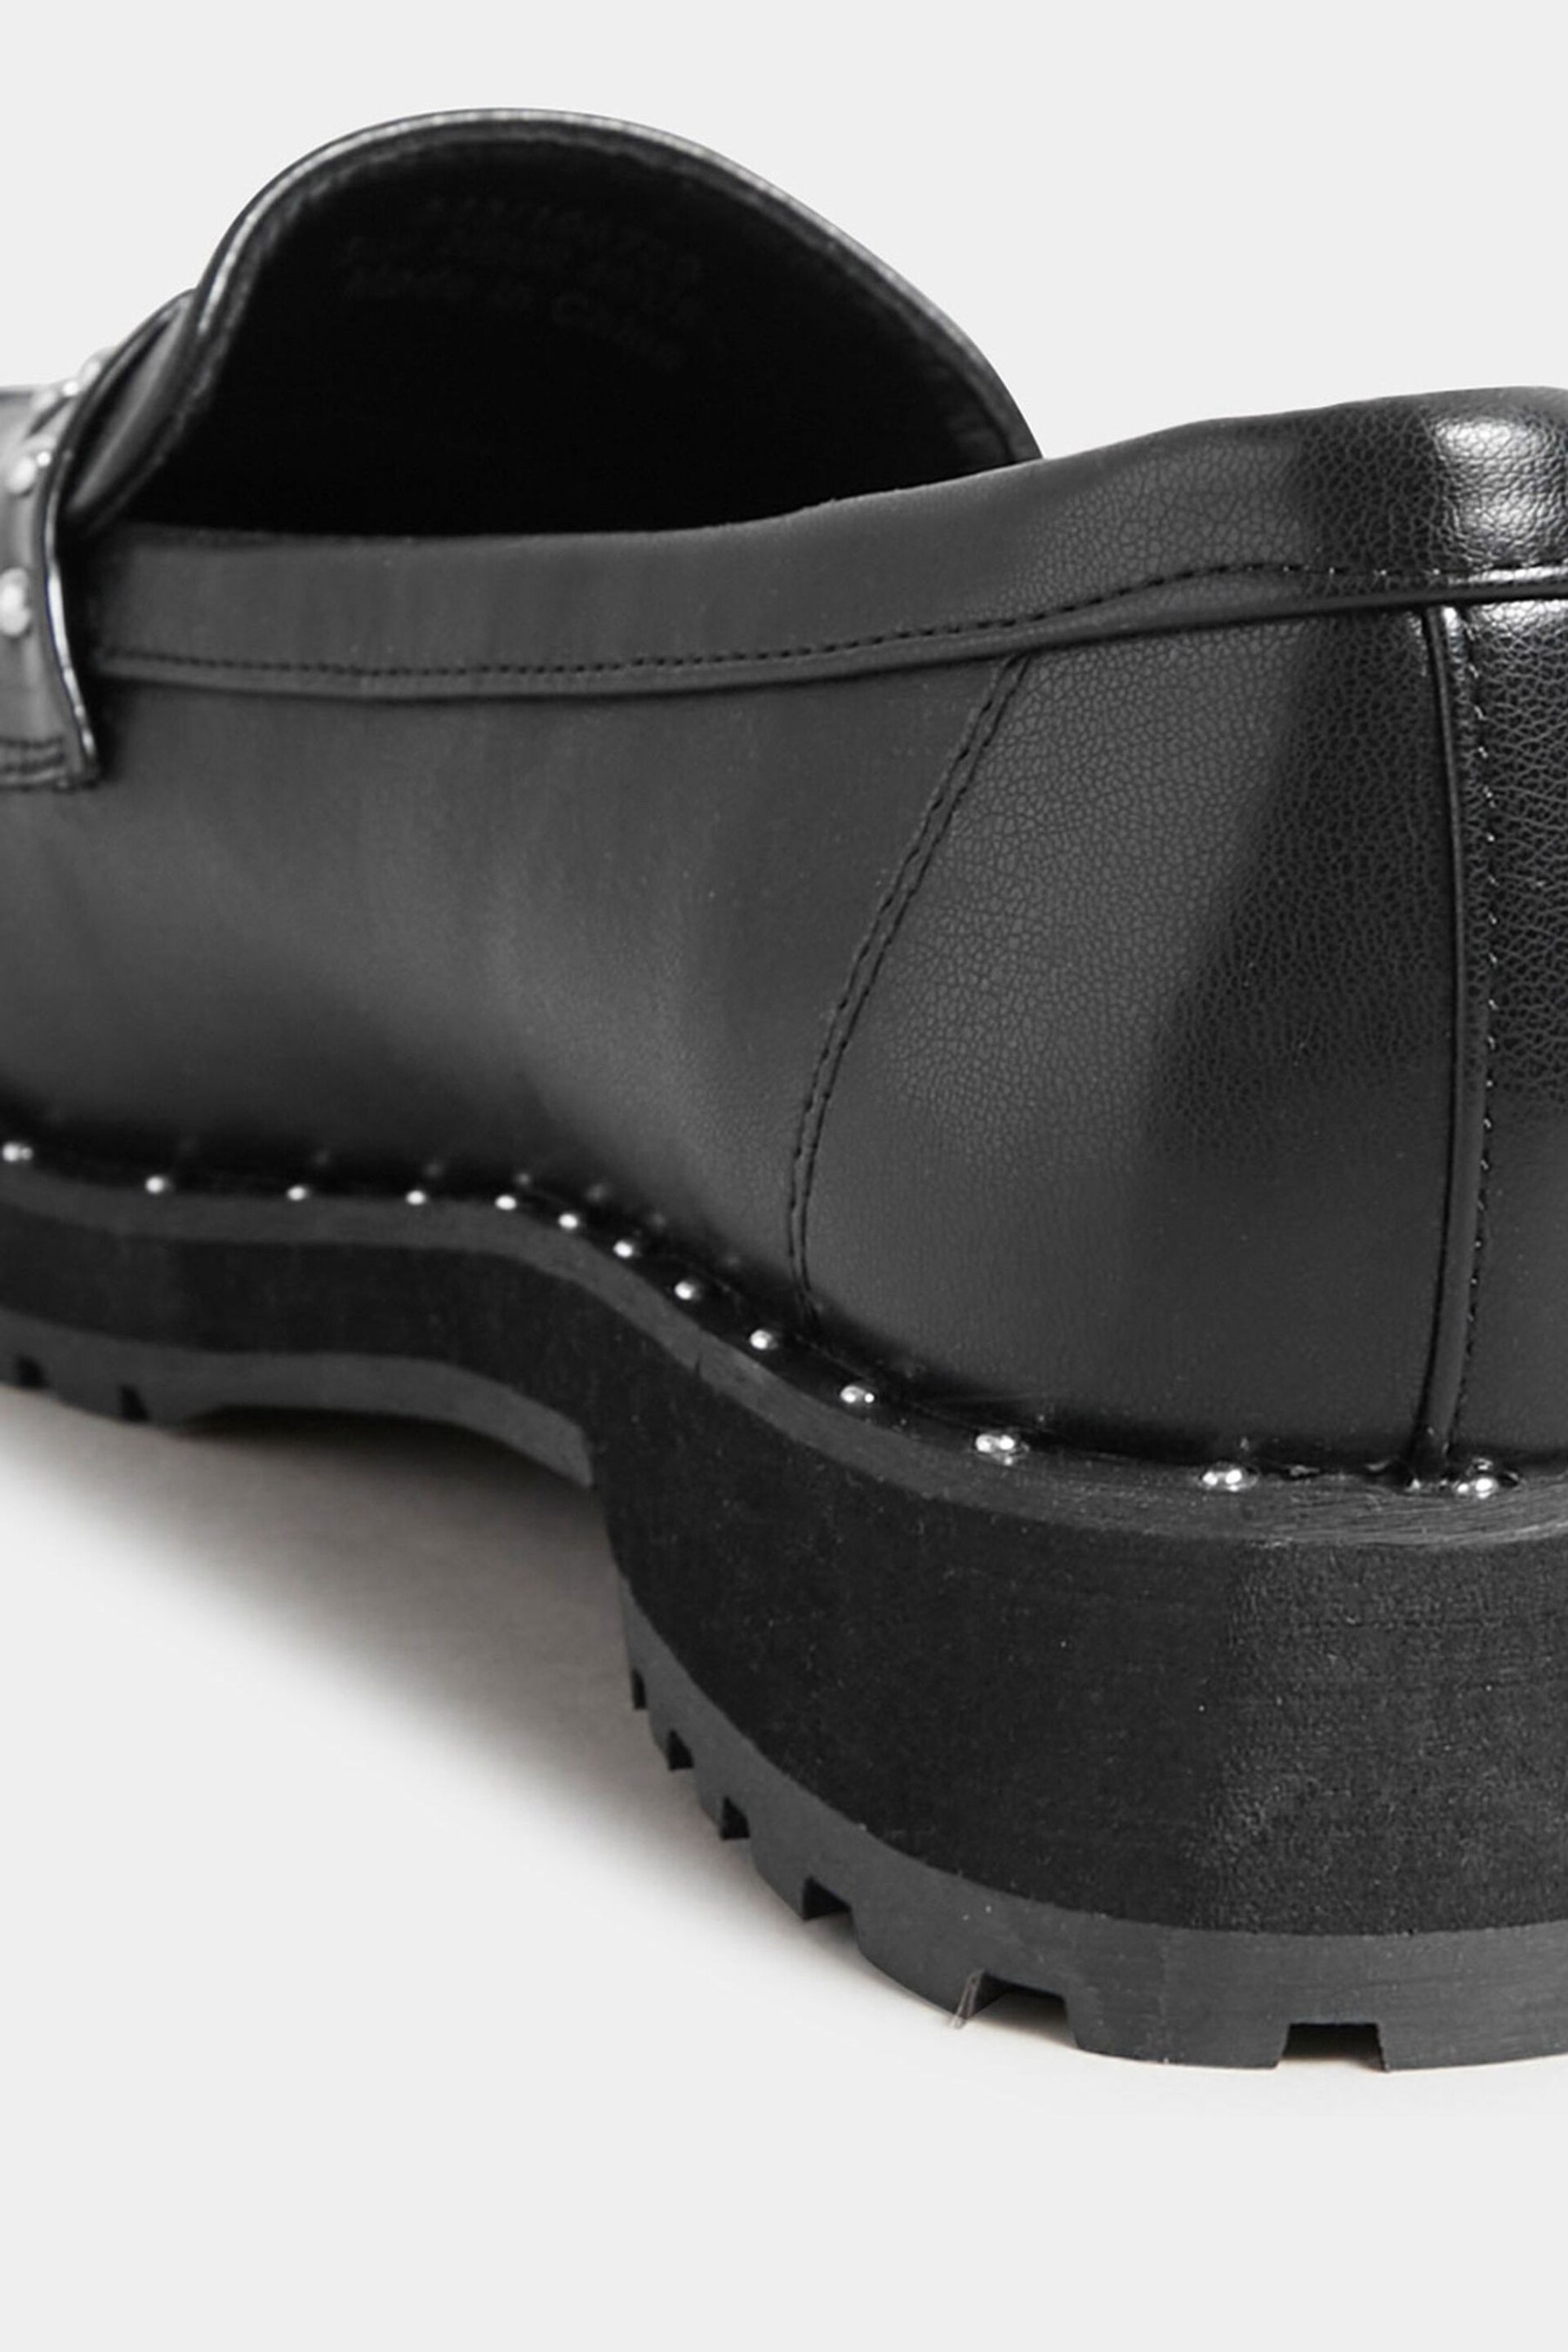 Long Tall Sally Black Studded Loafers - Image 3 of 3